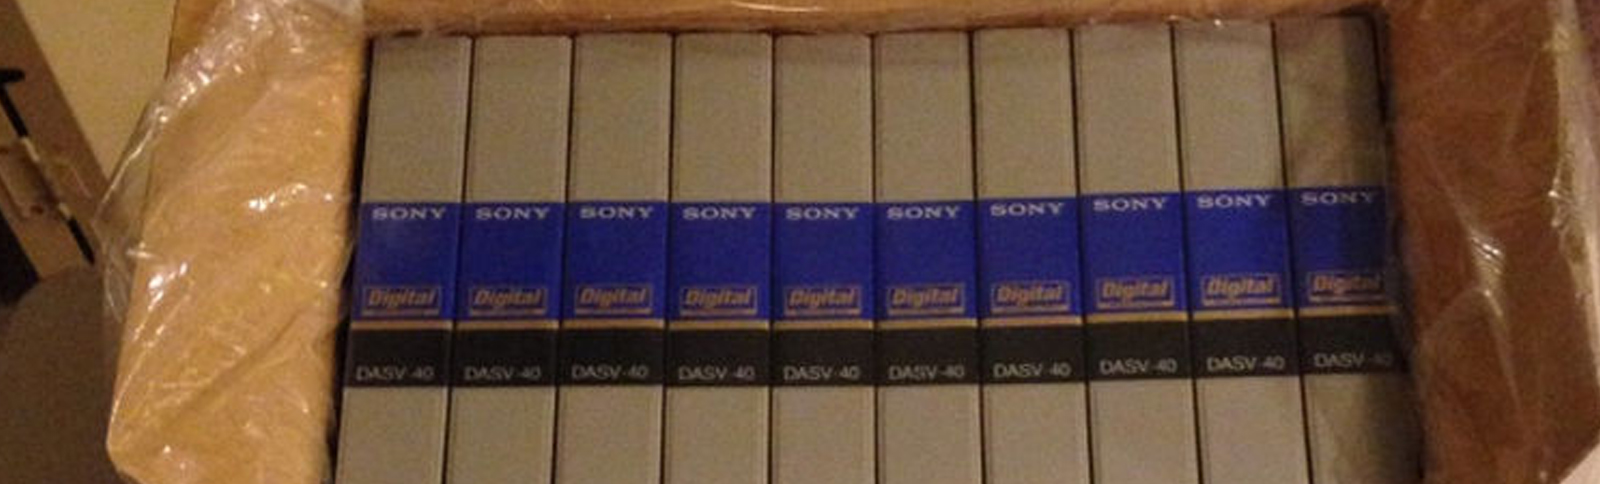 Broadcast and Standard VHS Tapes Oxfordshire UK